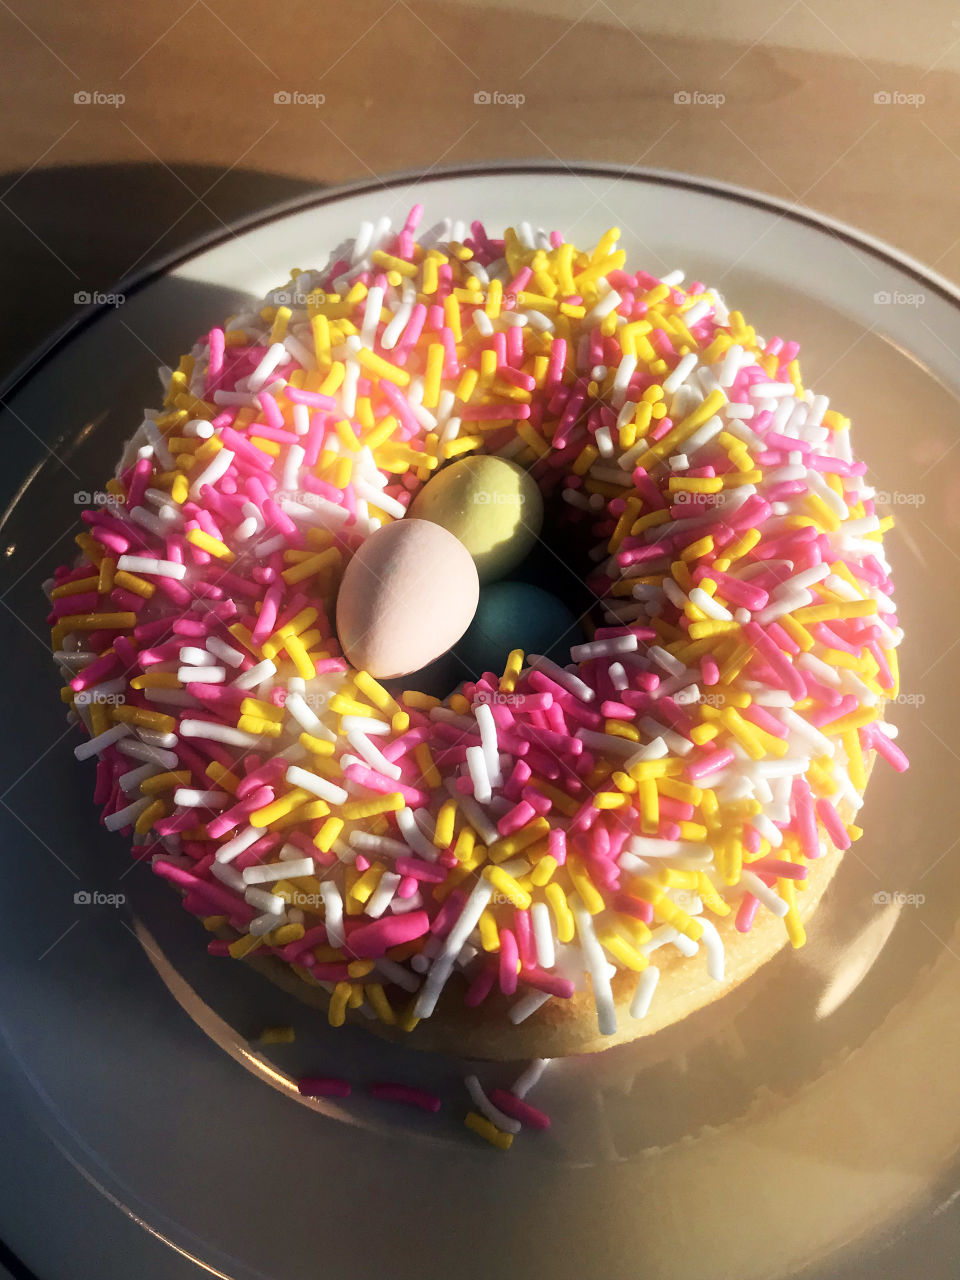 An Easter iced doughnut with pink,yellow and white sprinkles and pastel-coloured candy-coated chocolate eggs in the hole. Yummy! 🐣